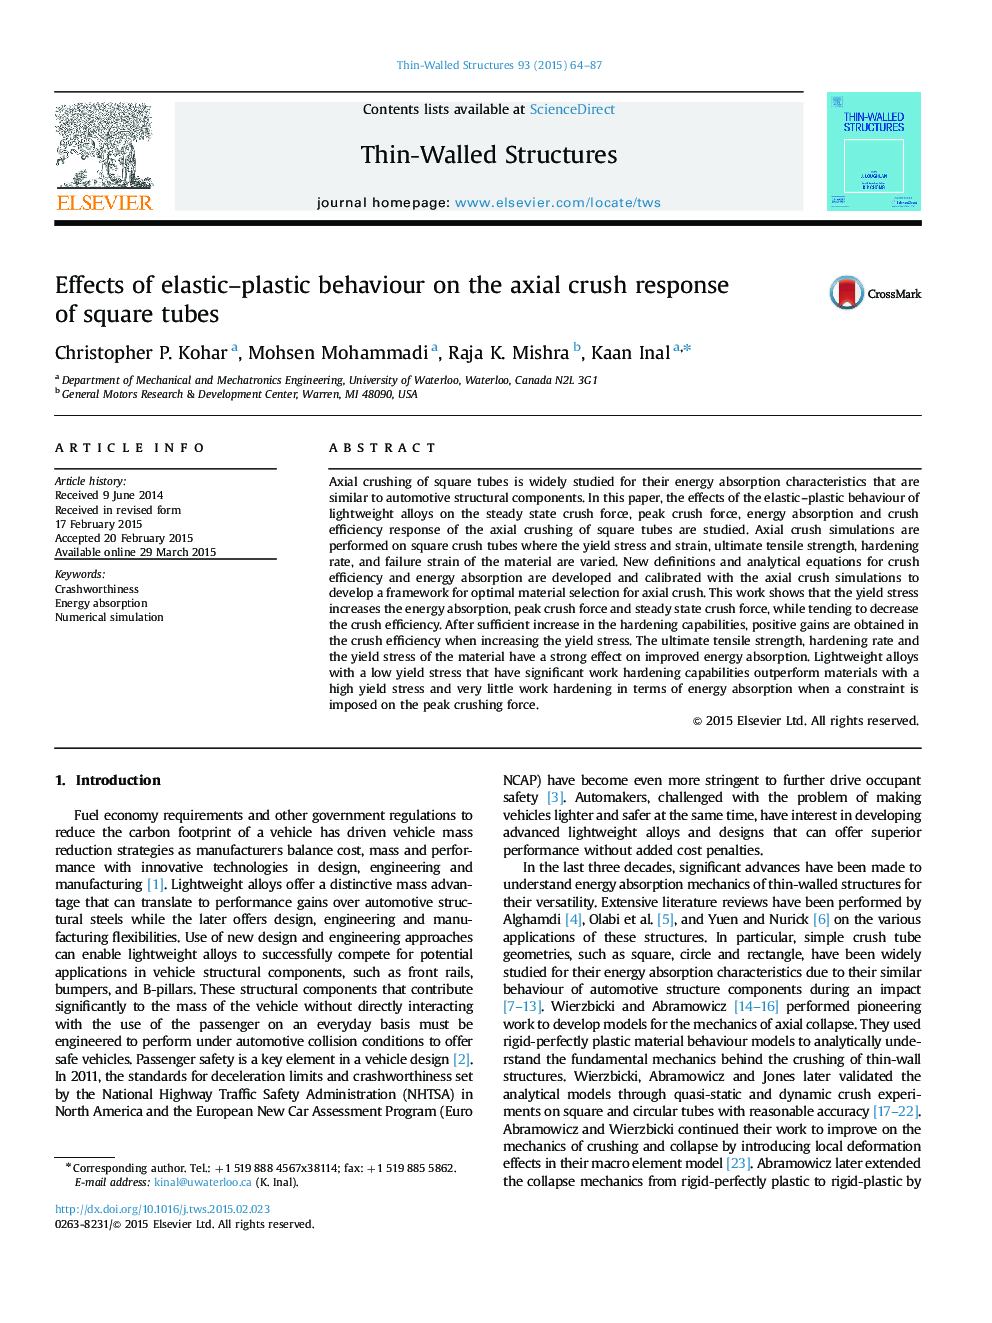 Effects of elastic–plastic behaviour on the axial crush response of square tubes